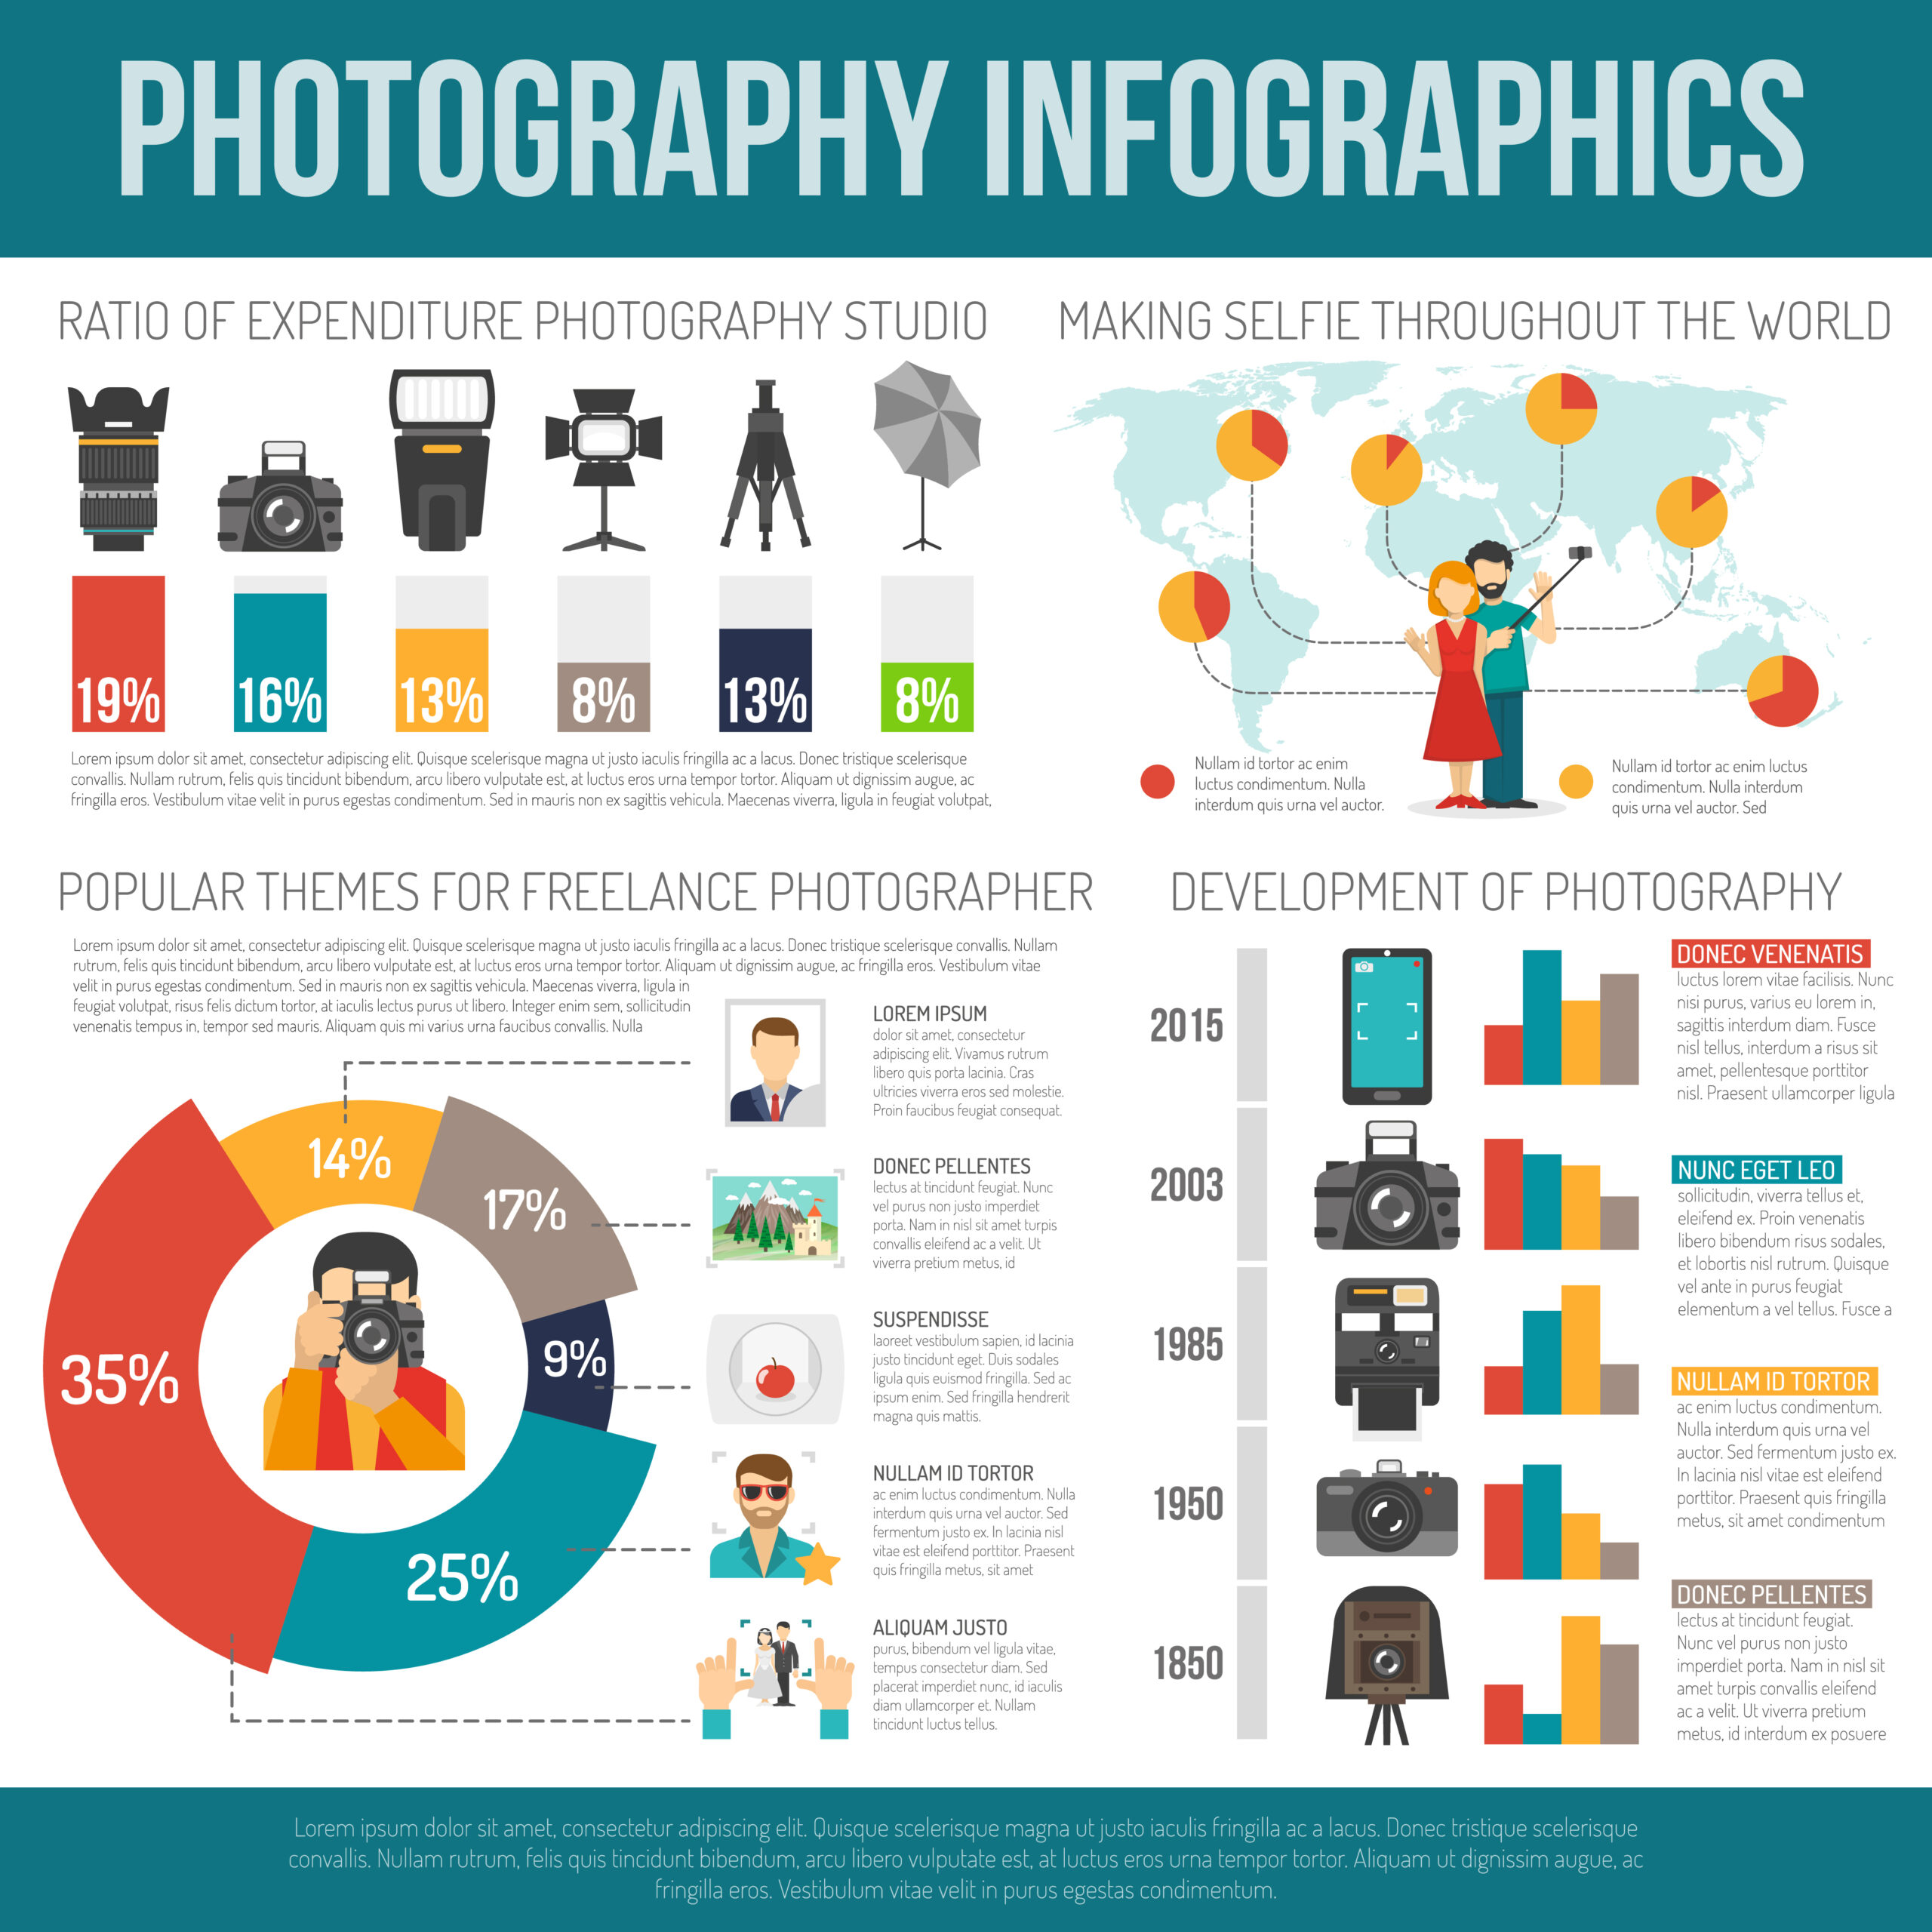 [INFOGRAPHIC] Complete Guide For Choosing a Wedding Photographer - Digby & Rose | Digby & Rose ...